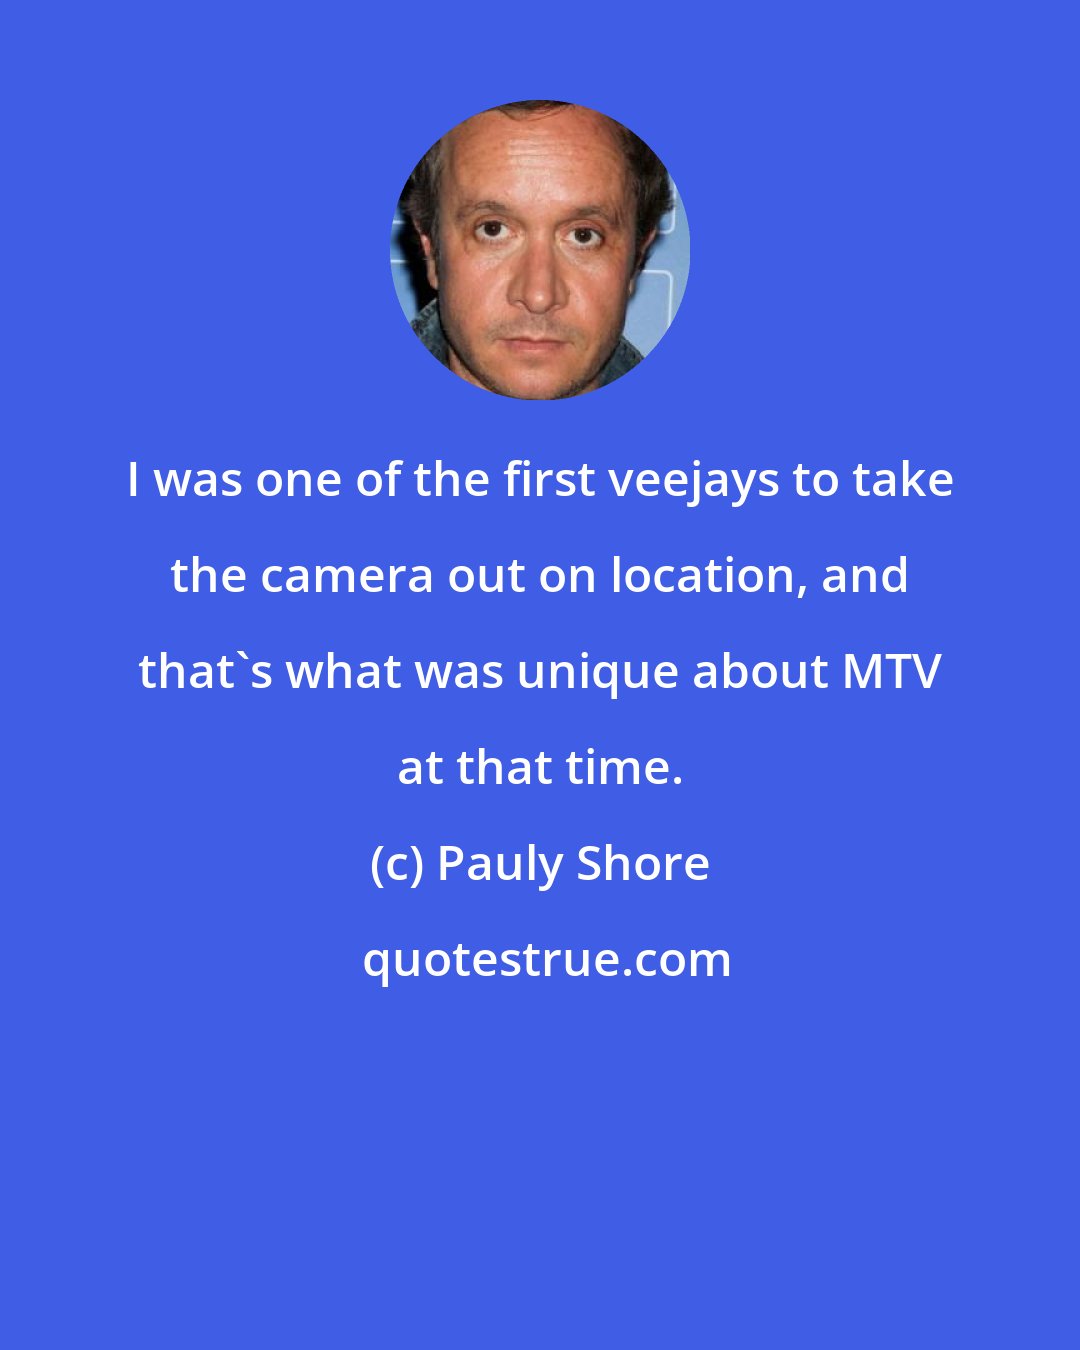 Pauly Shore: I was one of the first veejays to take the camera out on location, and that's what was unique about MTV at that time.